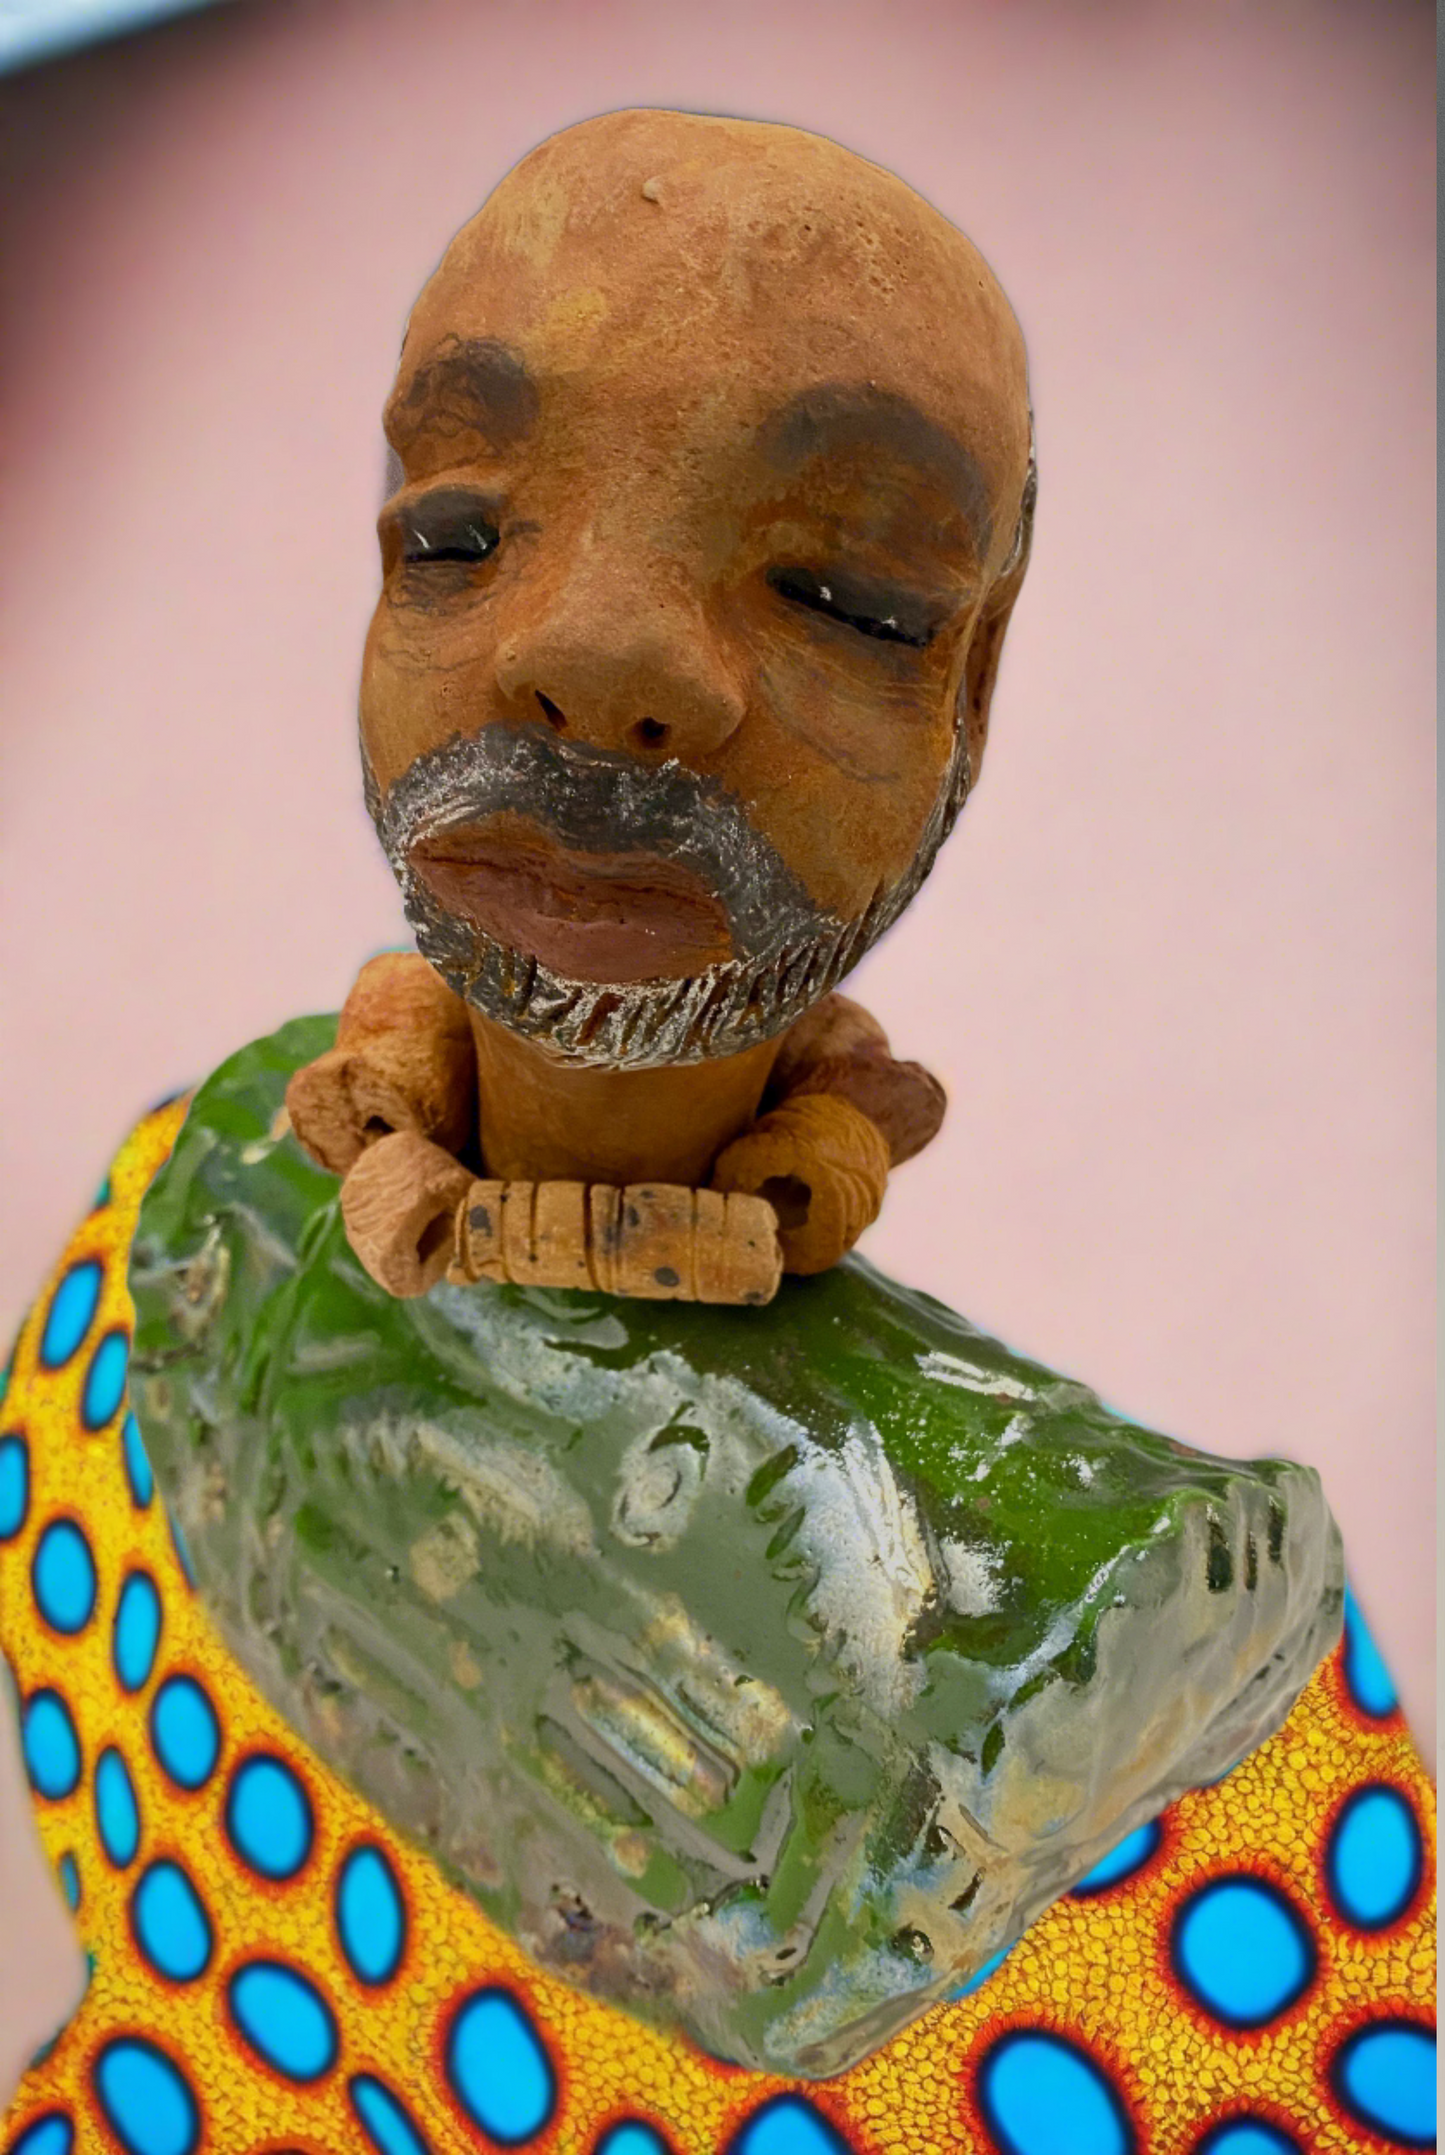 Albert measures 7.5" x 6" x 3" and weights 2.5lbs.<br>He is dressed in a metallic copper green dashiki.<br>He is partially bald, sporting a salt and peppered beard.<br>He is unique within the Herdew collection! Albert is the perfect size and weight for easy portability. His stylish outfit ensures he always stands out in the crowd. He's sure to be the talk of your collection!